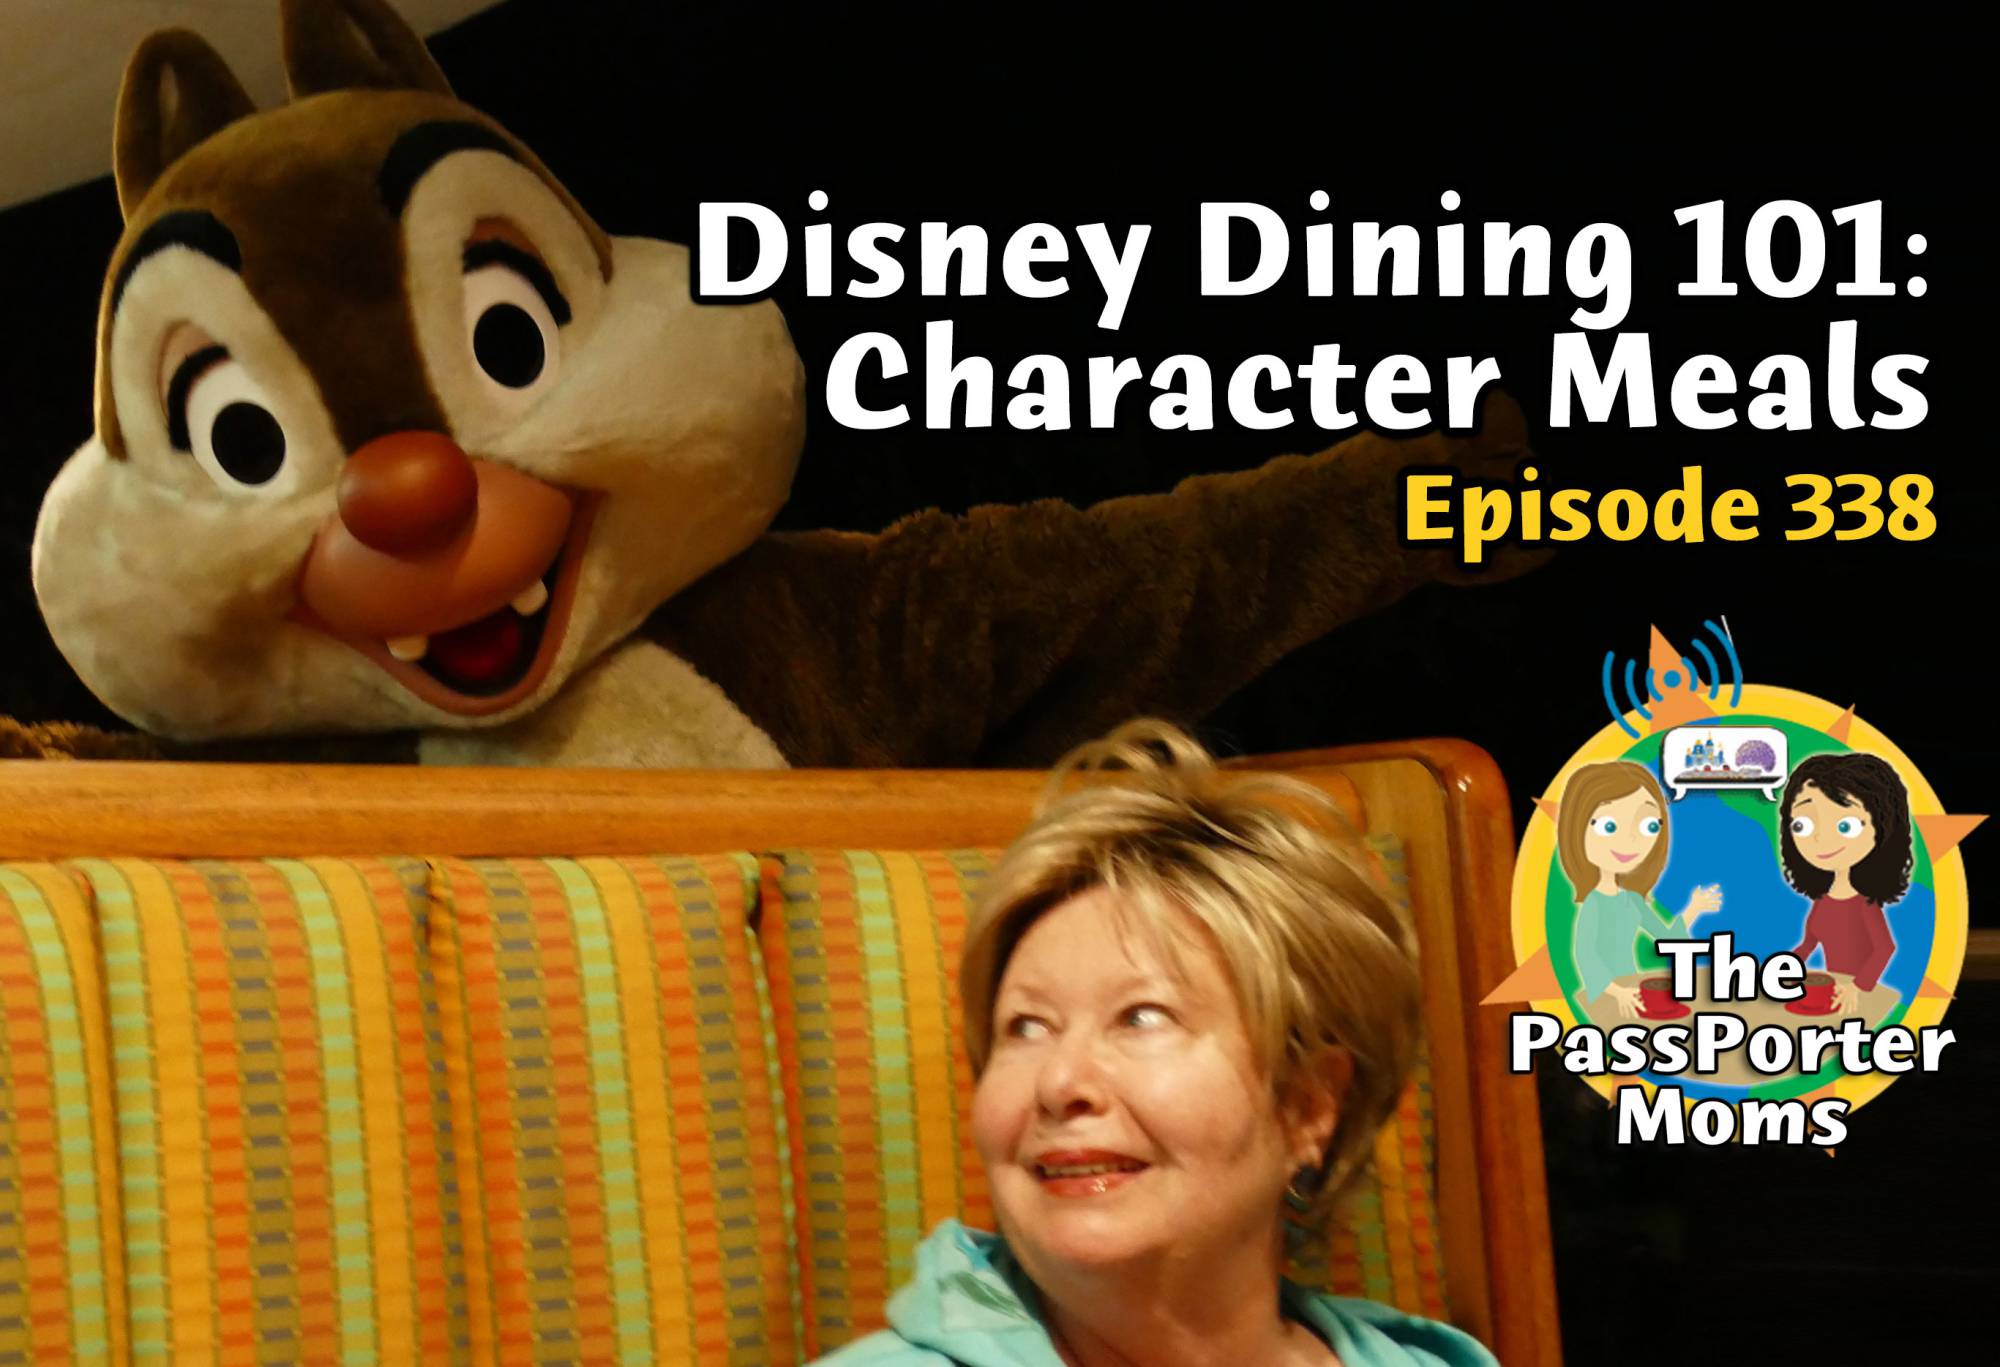 Disney Dining 101: Character Meals